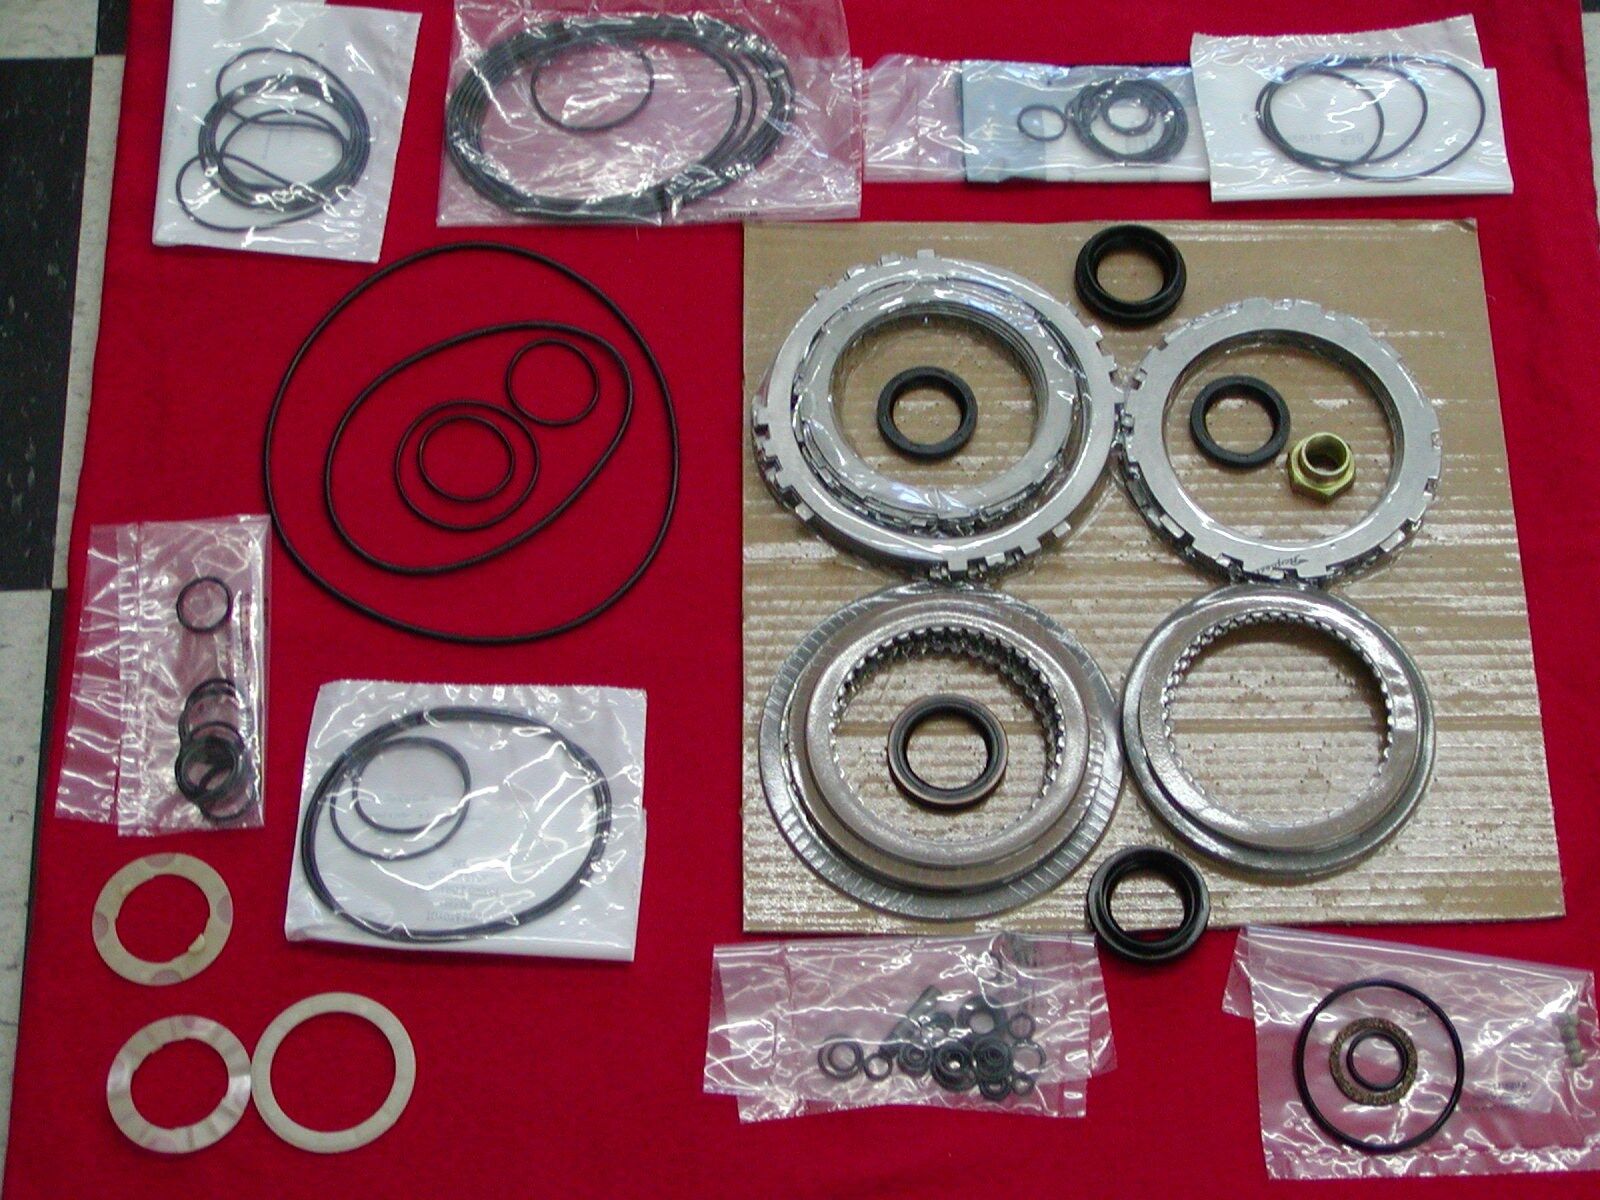 A140E A140L TRANSMISSION REBUILD KIT WITH STEELS 1987 to 2/1994